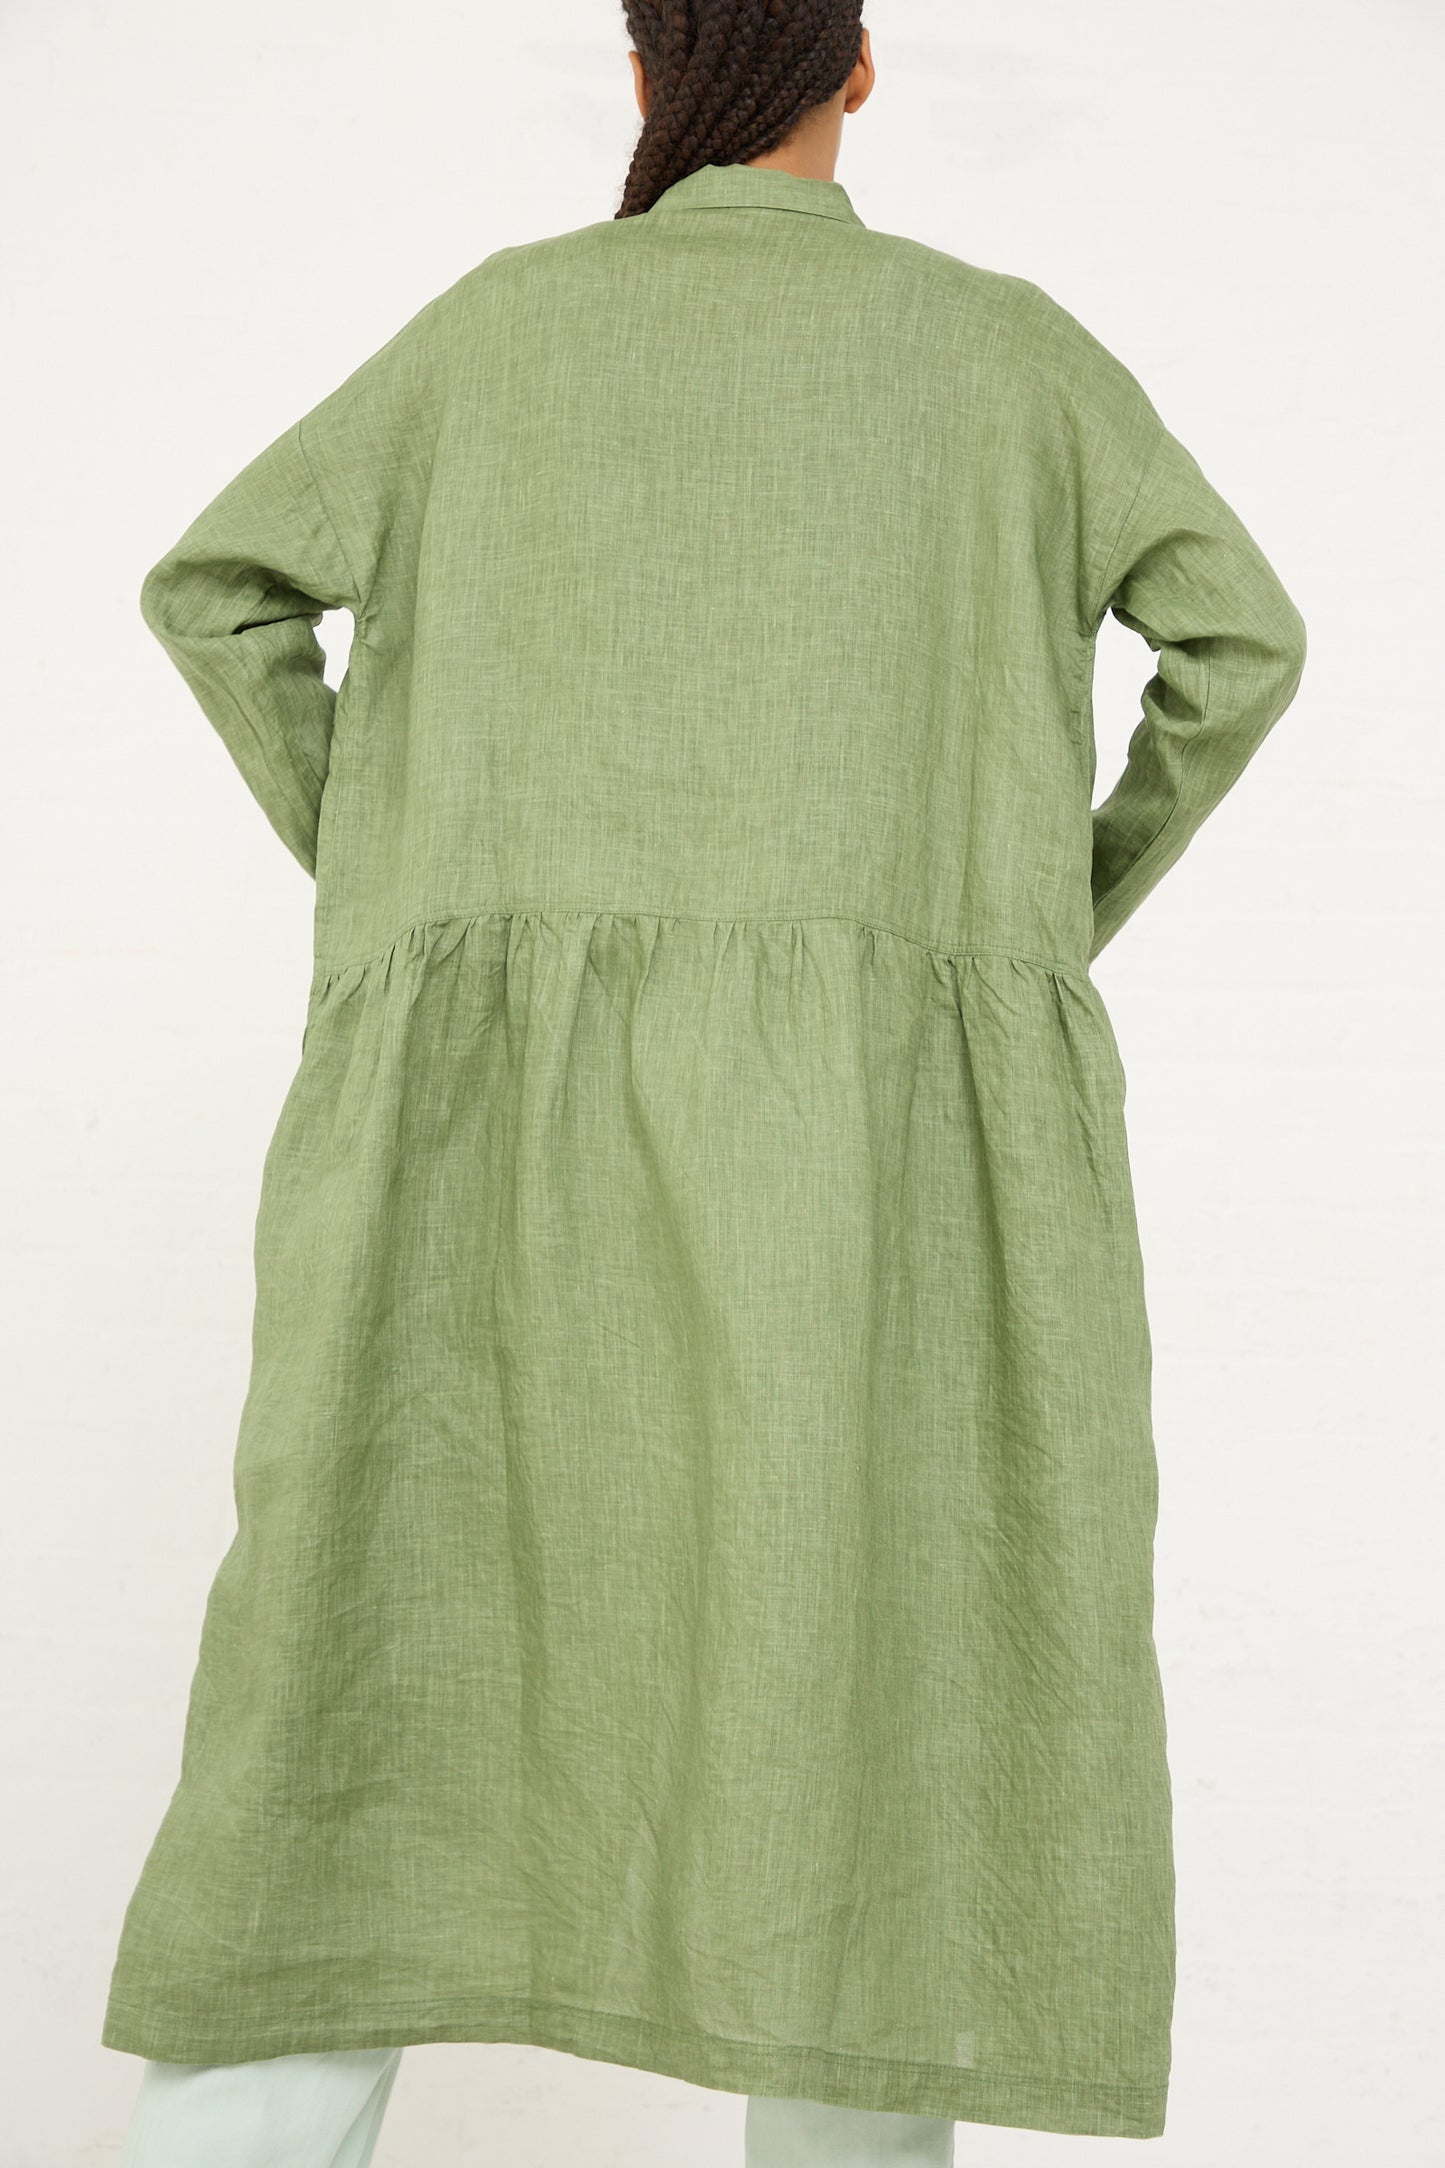 Woman standing with her back facing the camera, wearing a long, green, pigment-dyed Ichi Antiquités linen dress with a gathered waist.